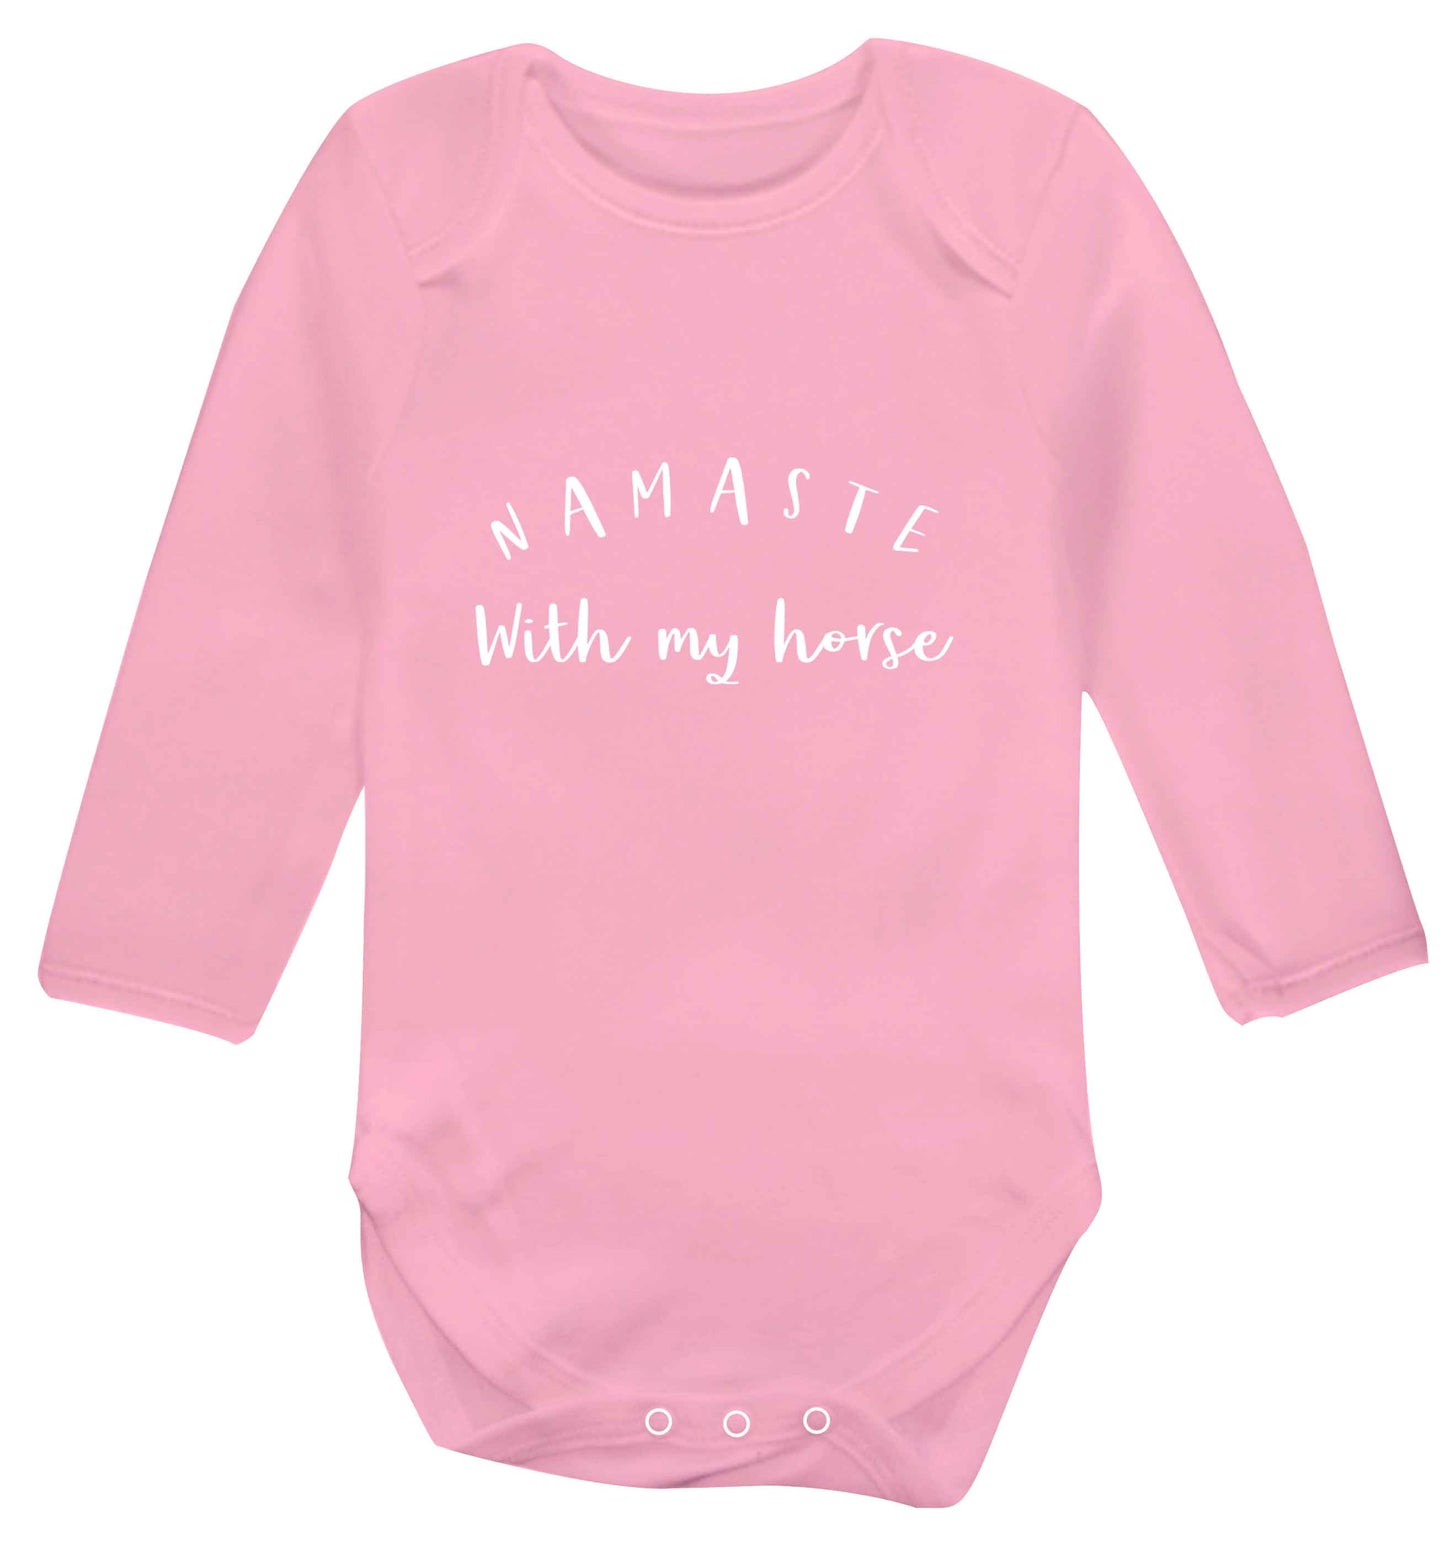 Namaste with my horse baby vest long sleeved pale pink 6-12 months